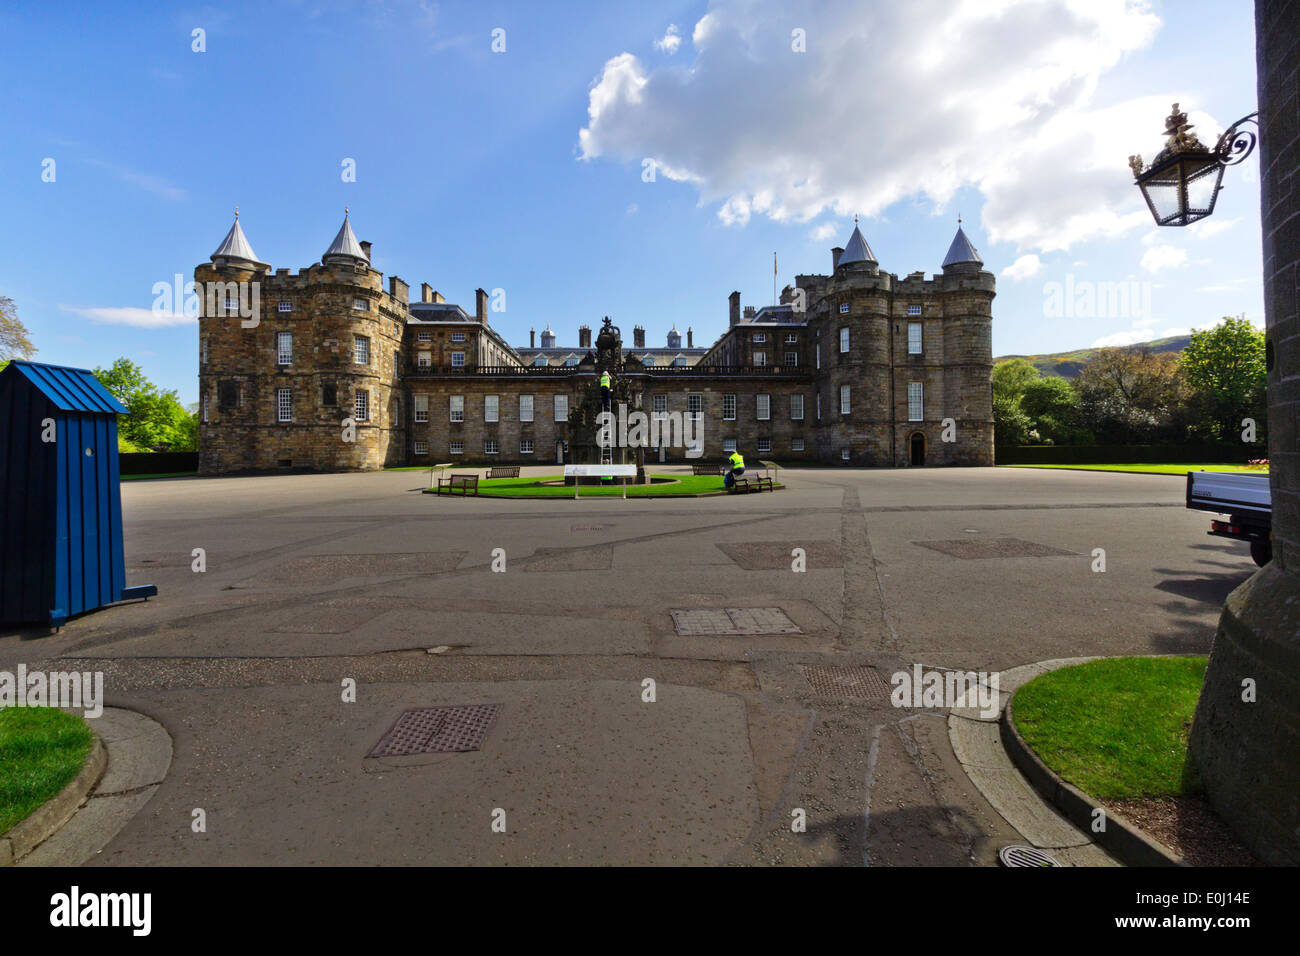 Hollyrood Palace Undergoing Cleaning, Repairs Stock Photo